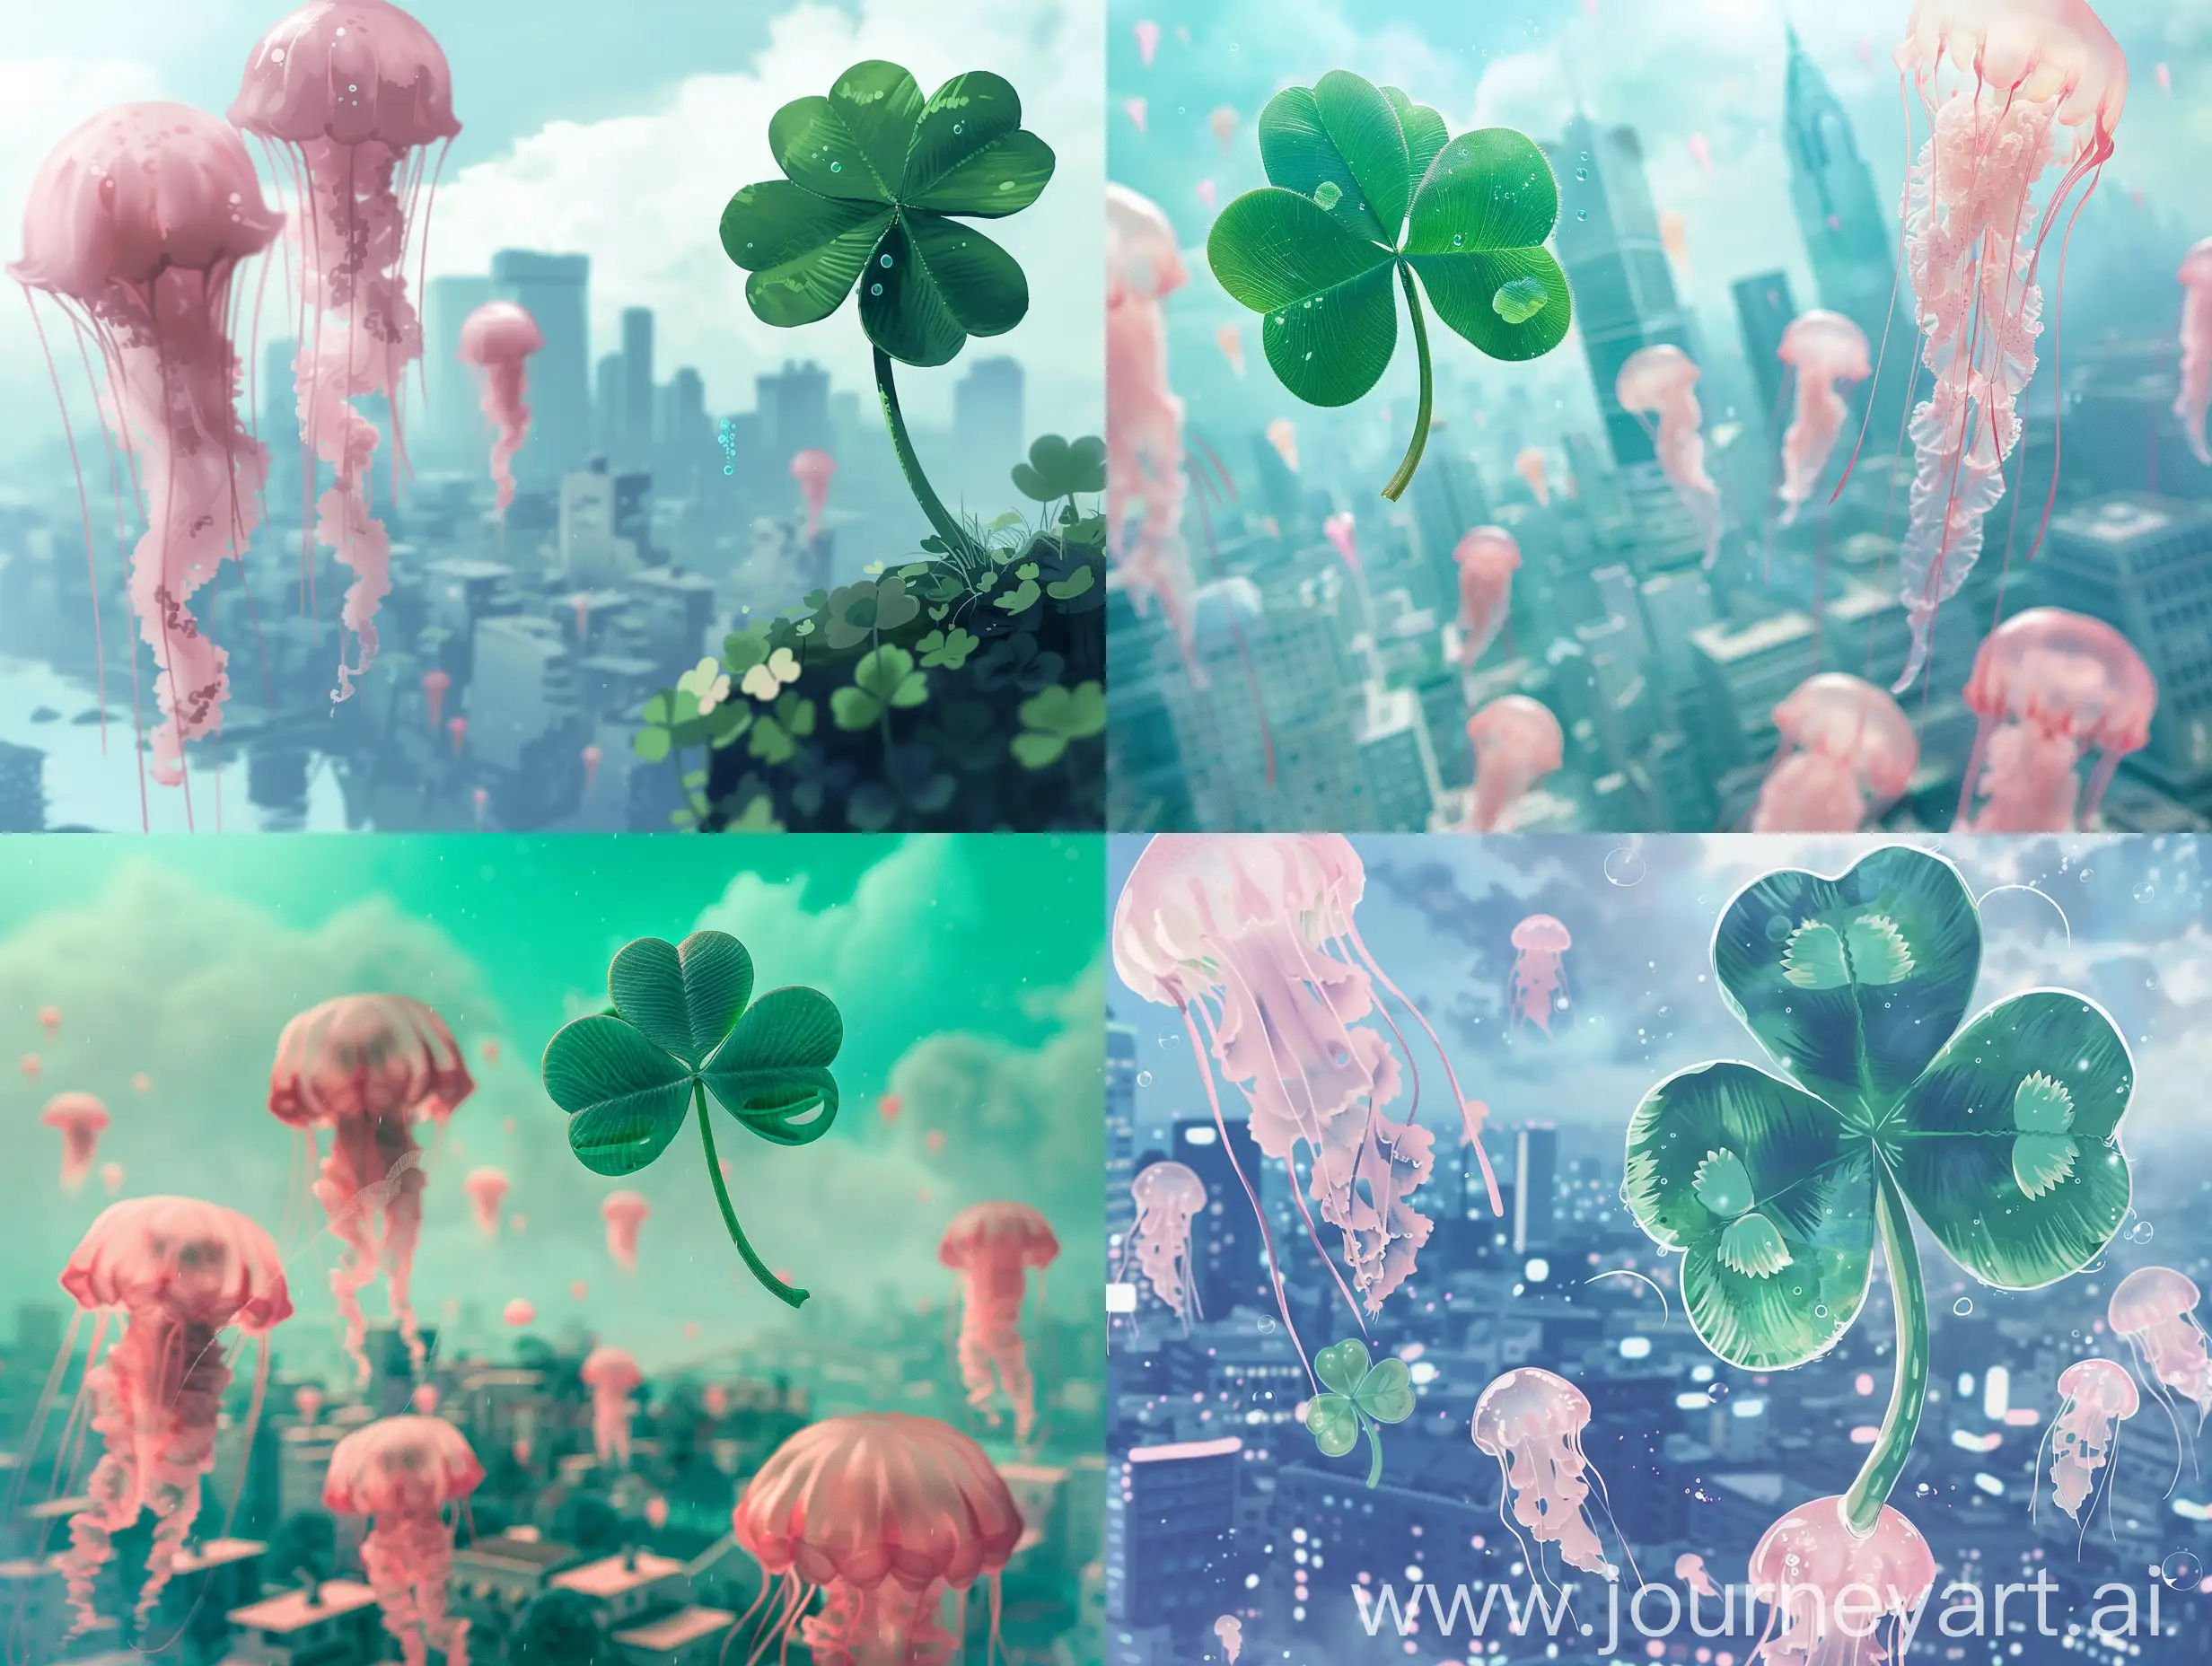 FourLeaf-Clover-Overlooking-City-Skyline-with-Pink-Jellyfish